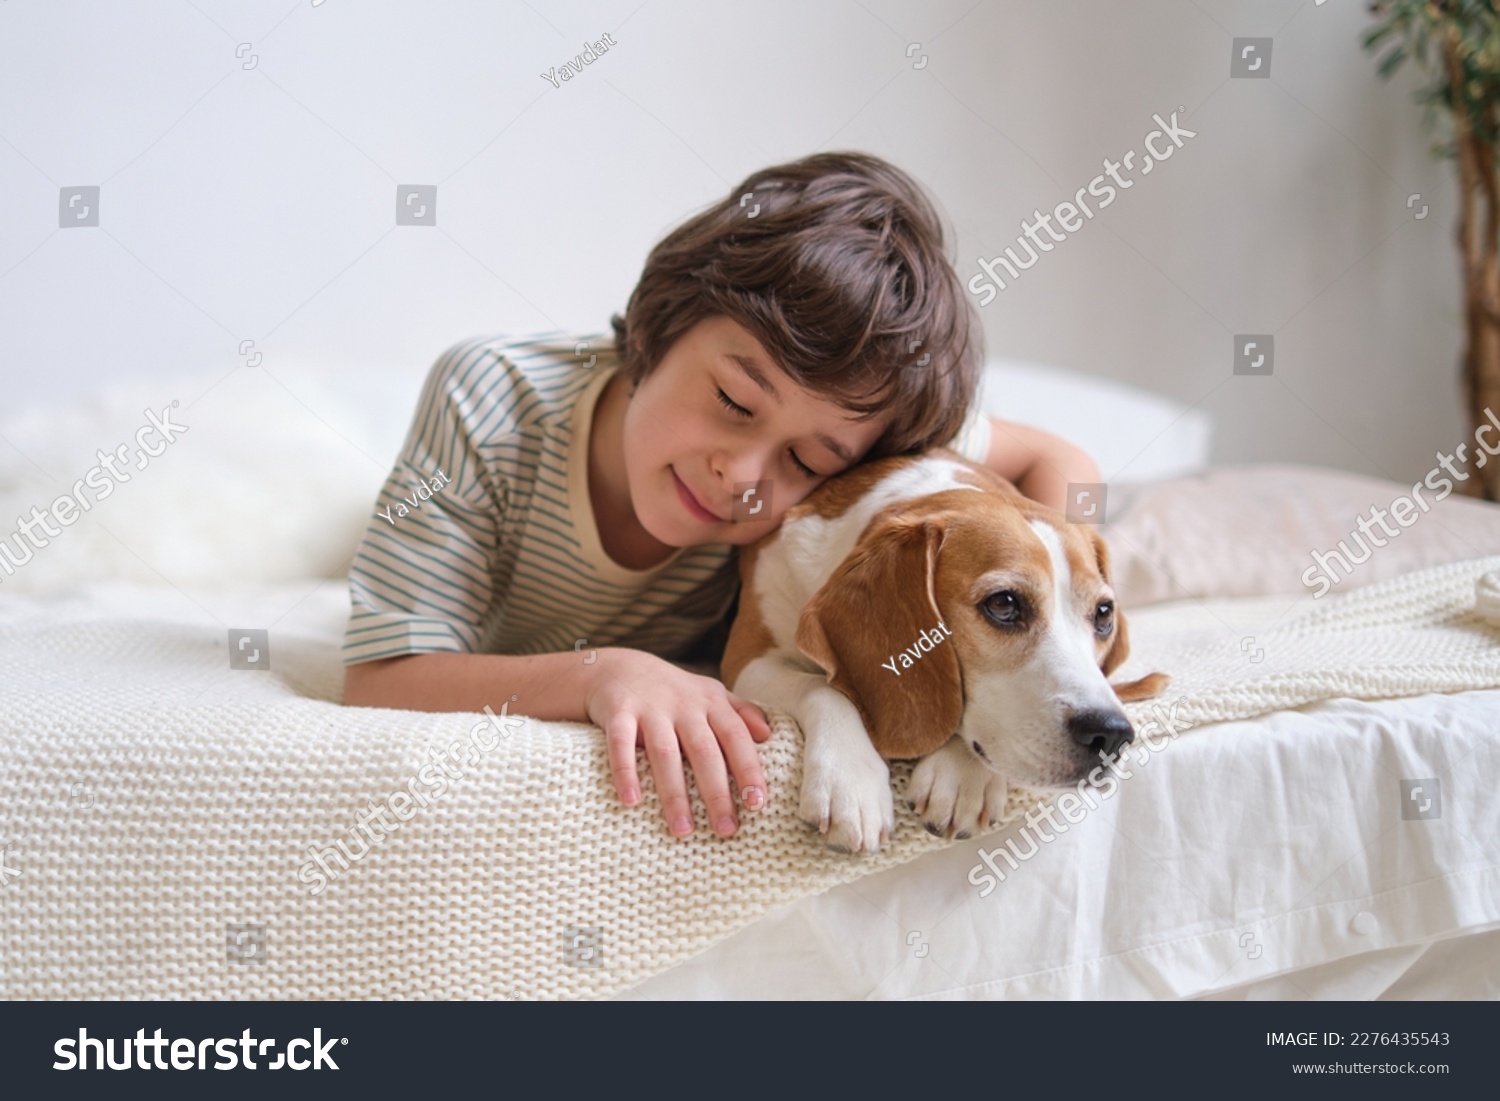 boy hugging his beagle on the cozy bed. importance of nurturing a loving relationship between children and pets, as well as teaching responsibility and kindness. #2276435543